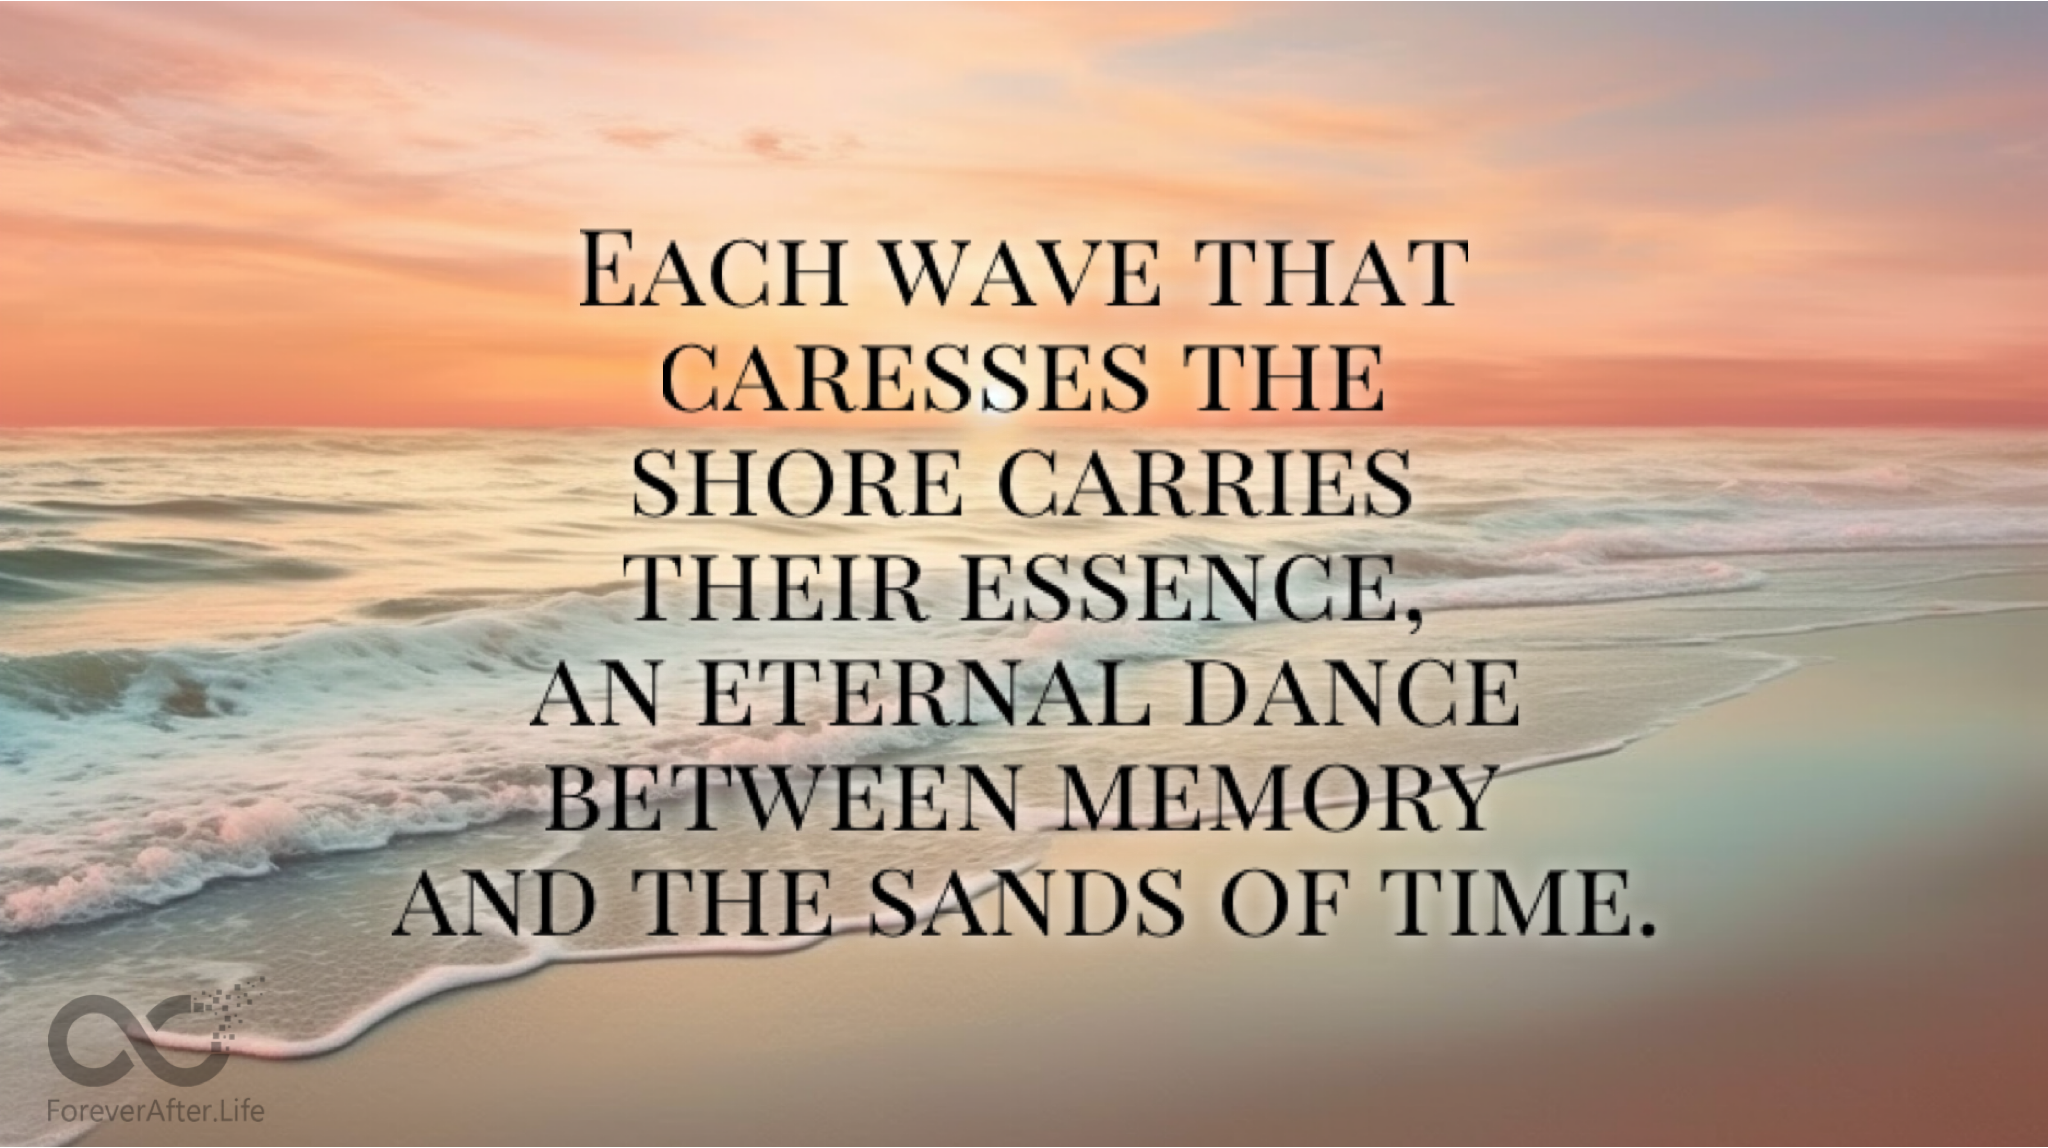 Each wave that caresses the shore carries their essence, an eternal dance between memory and the sands of time.